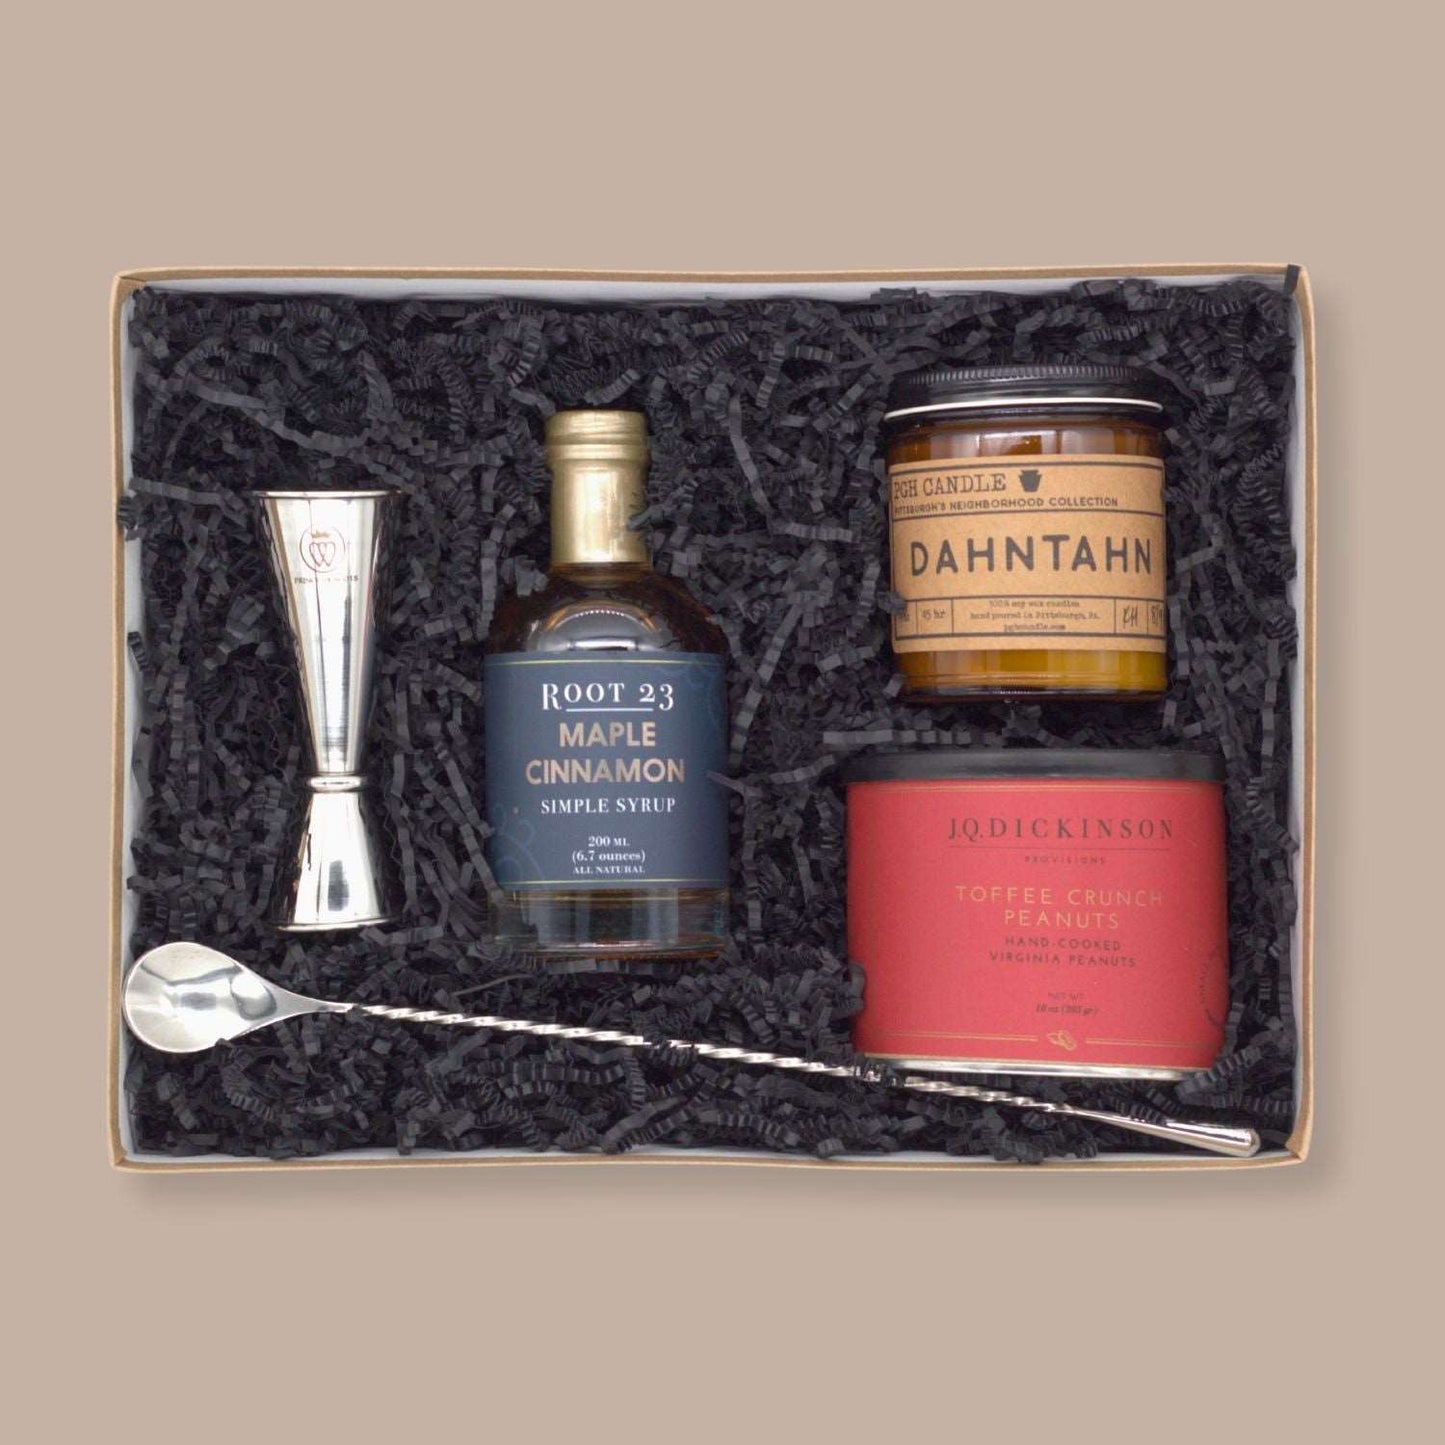 Bar Essentials Gift Box - KINSHIP GIFT - Celebration Gift - KINSHIP GIFT -  - Pittsburgh - gift - boxes - gift - baskets - corporate - gifts - holiday - gifts